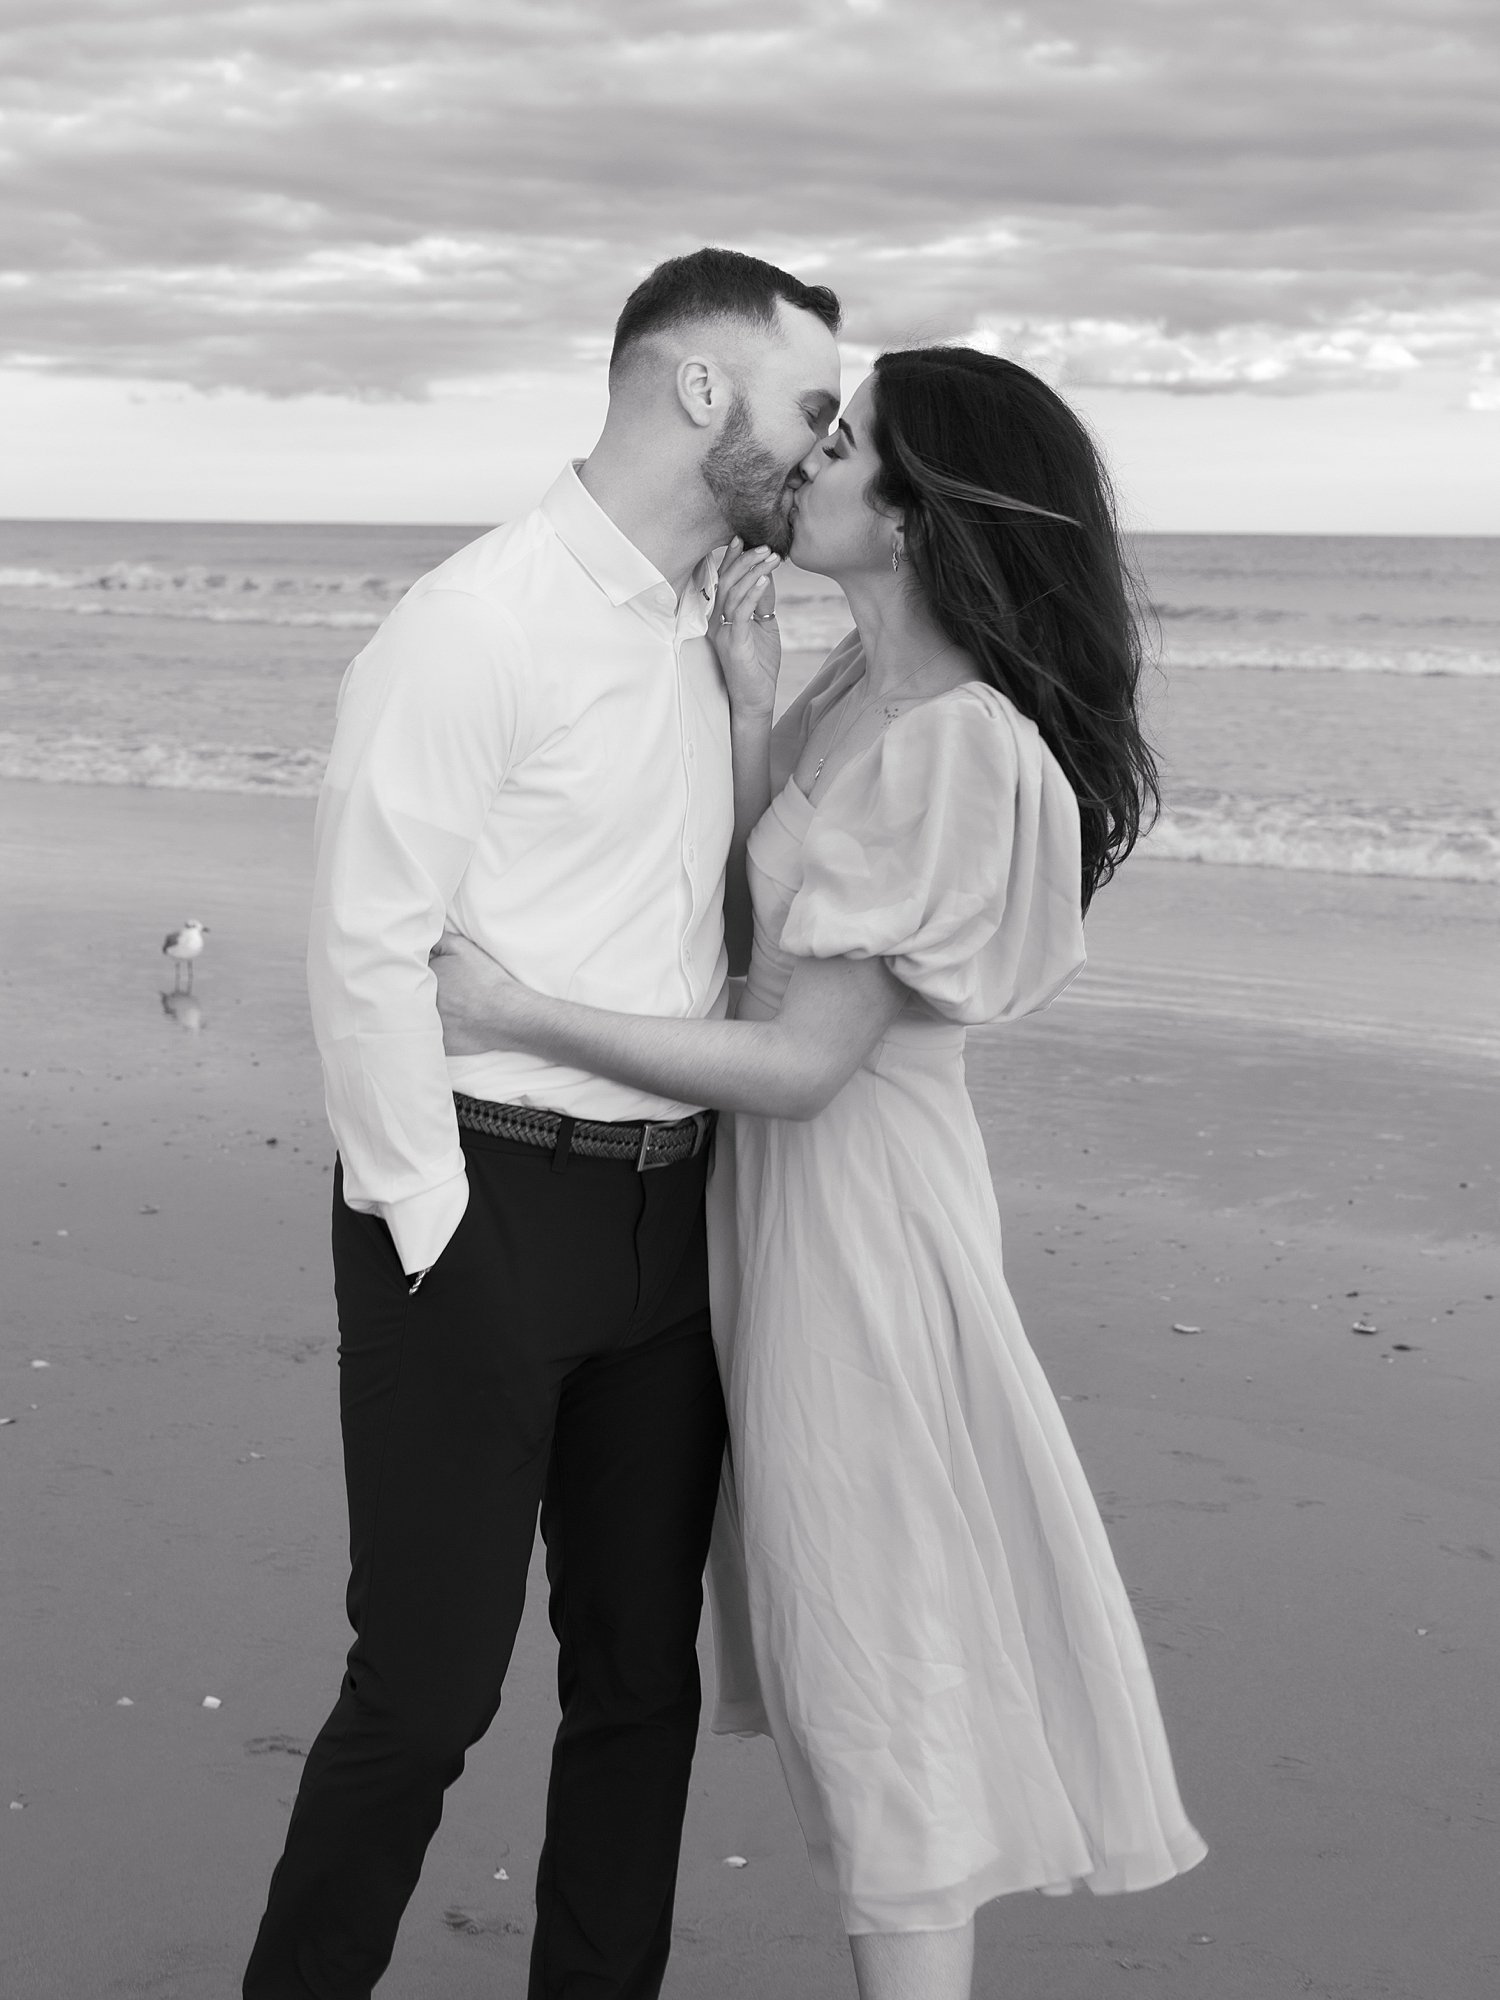 engaged man and woman kiss n beach at sunset in Ocean City NJ